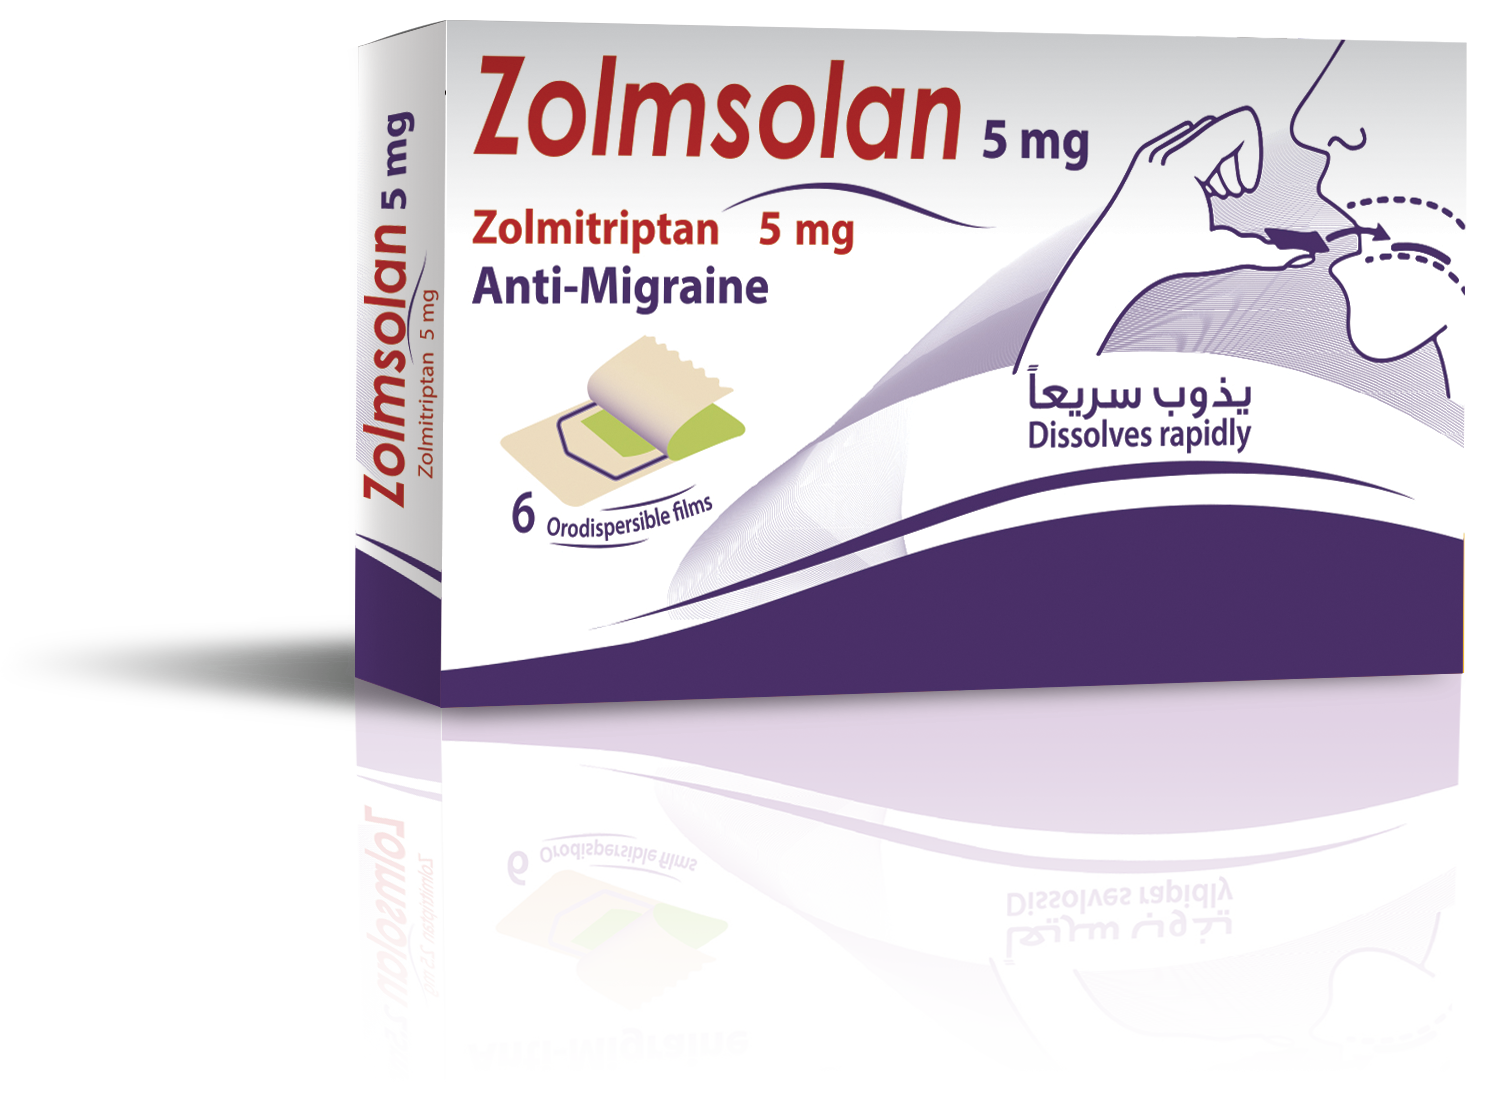 ZOLMSOLAN… The first TRIPTANS ODF in the Egyptian Pharmaceutical Industry which act as selective 5-HT1B/1D receptors agonist (5)